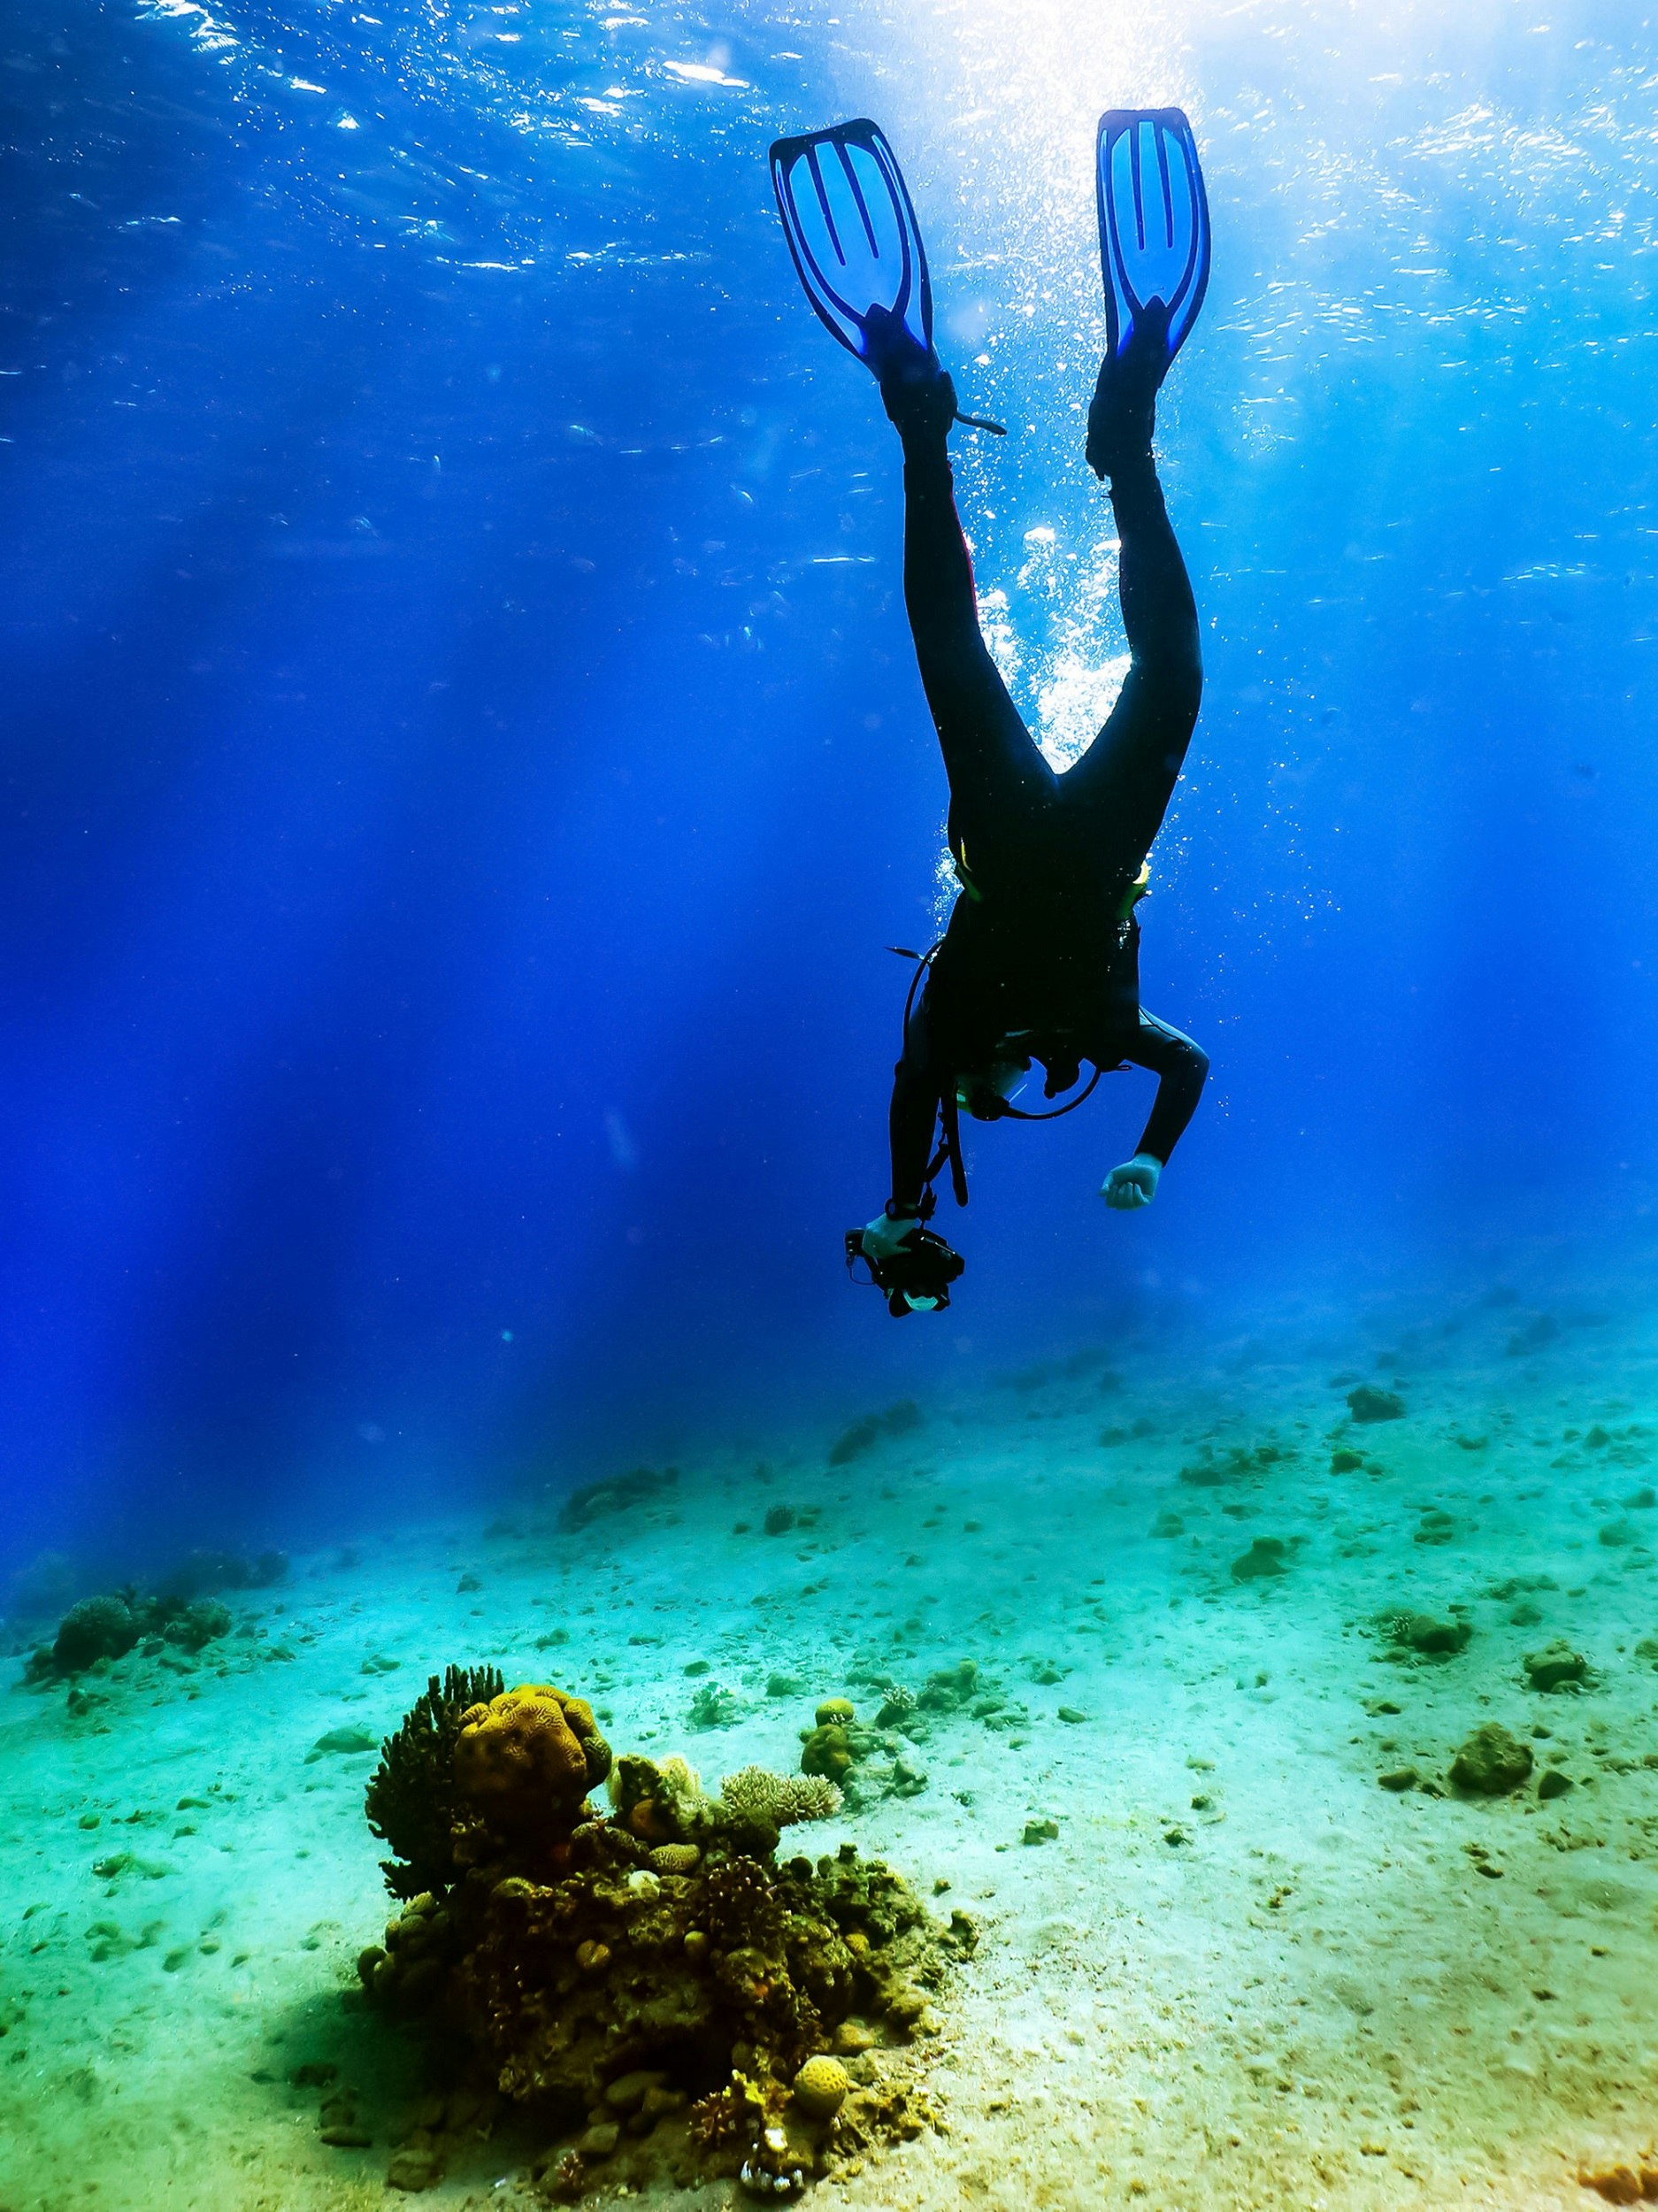 A diver in full scuba gear has their head down in the direction of a patch of coral on the seabed.